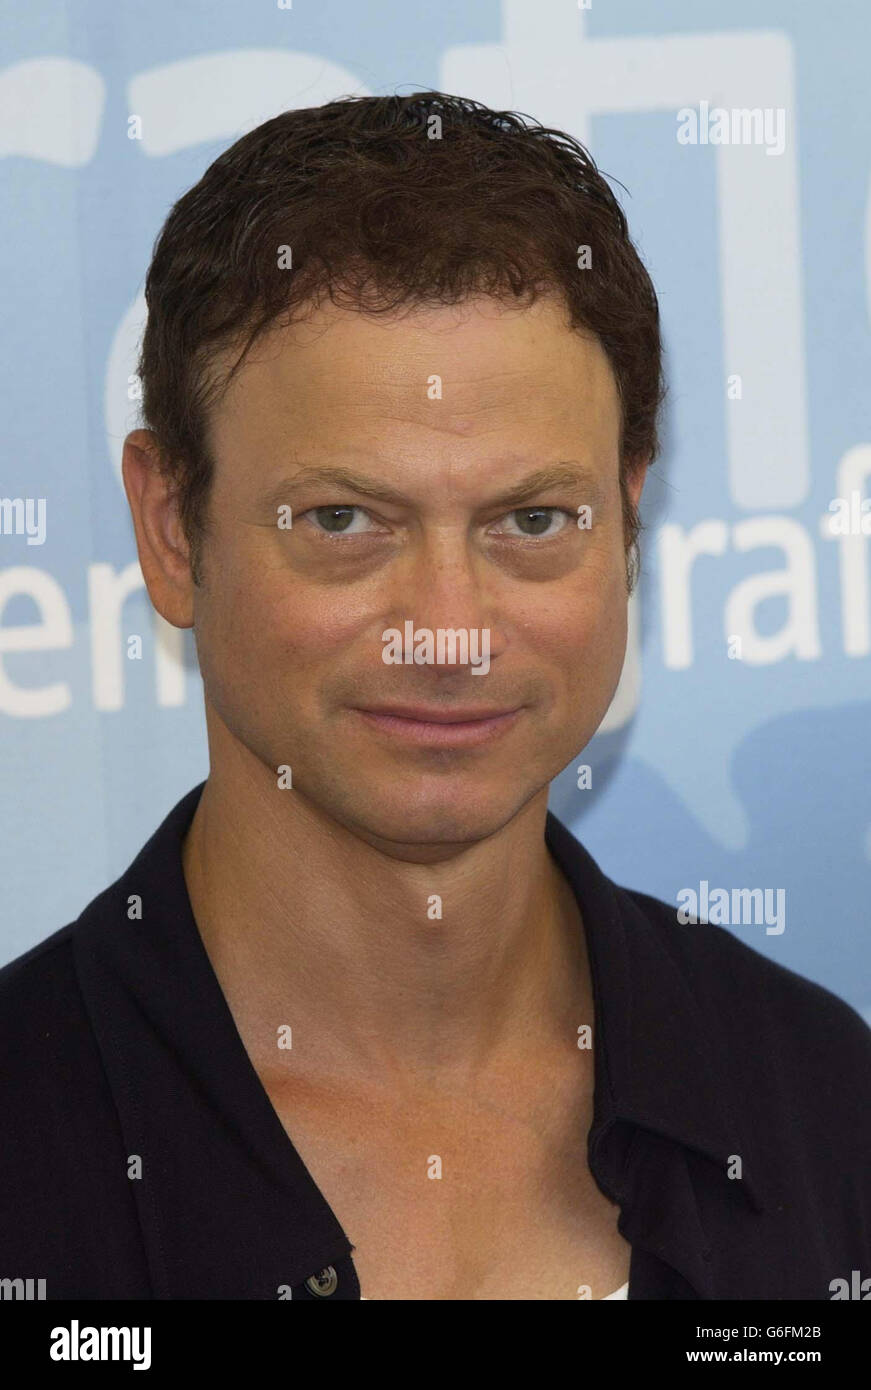 American actor Gary Sinise poses for photographers to promote his new film 'The Human Stain' at Mostra Internazionale d'Arte Cinematografica Lido in Venice, Italy, during the 60th annual Venice Film Festival. Stock Photo